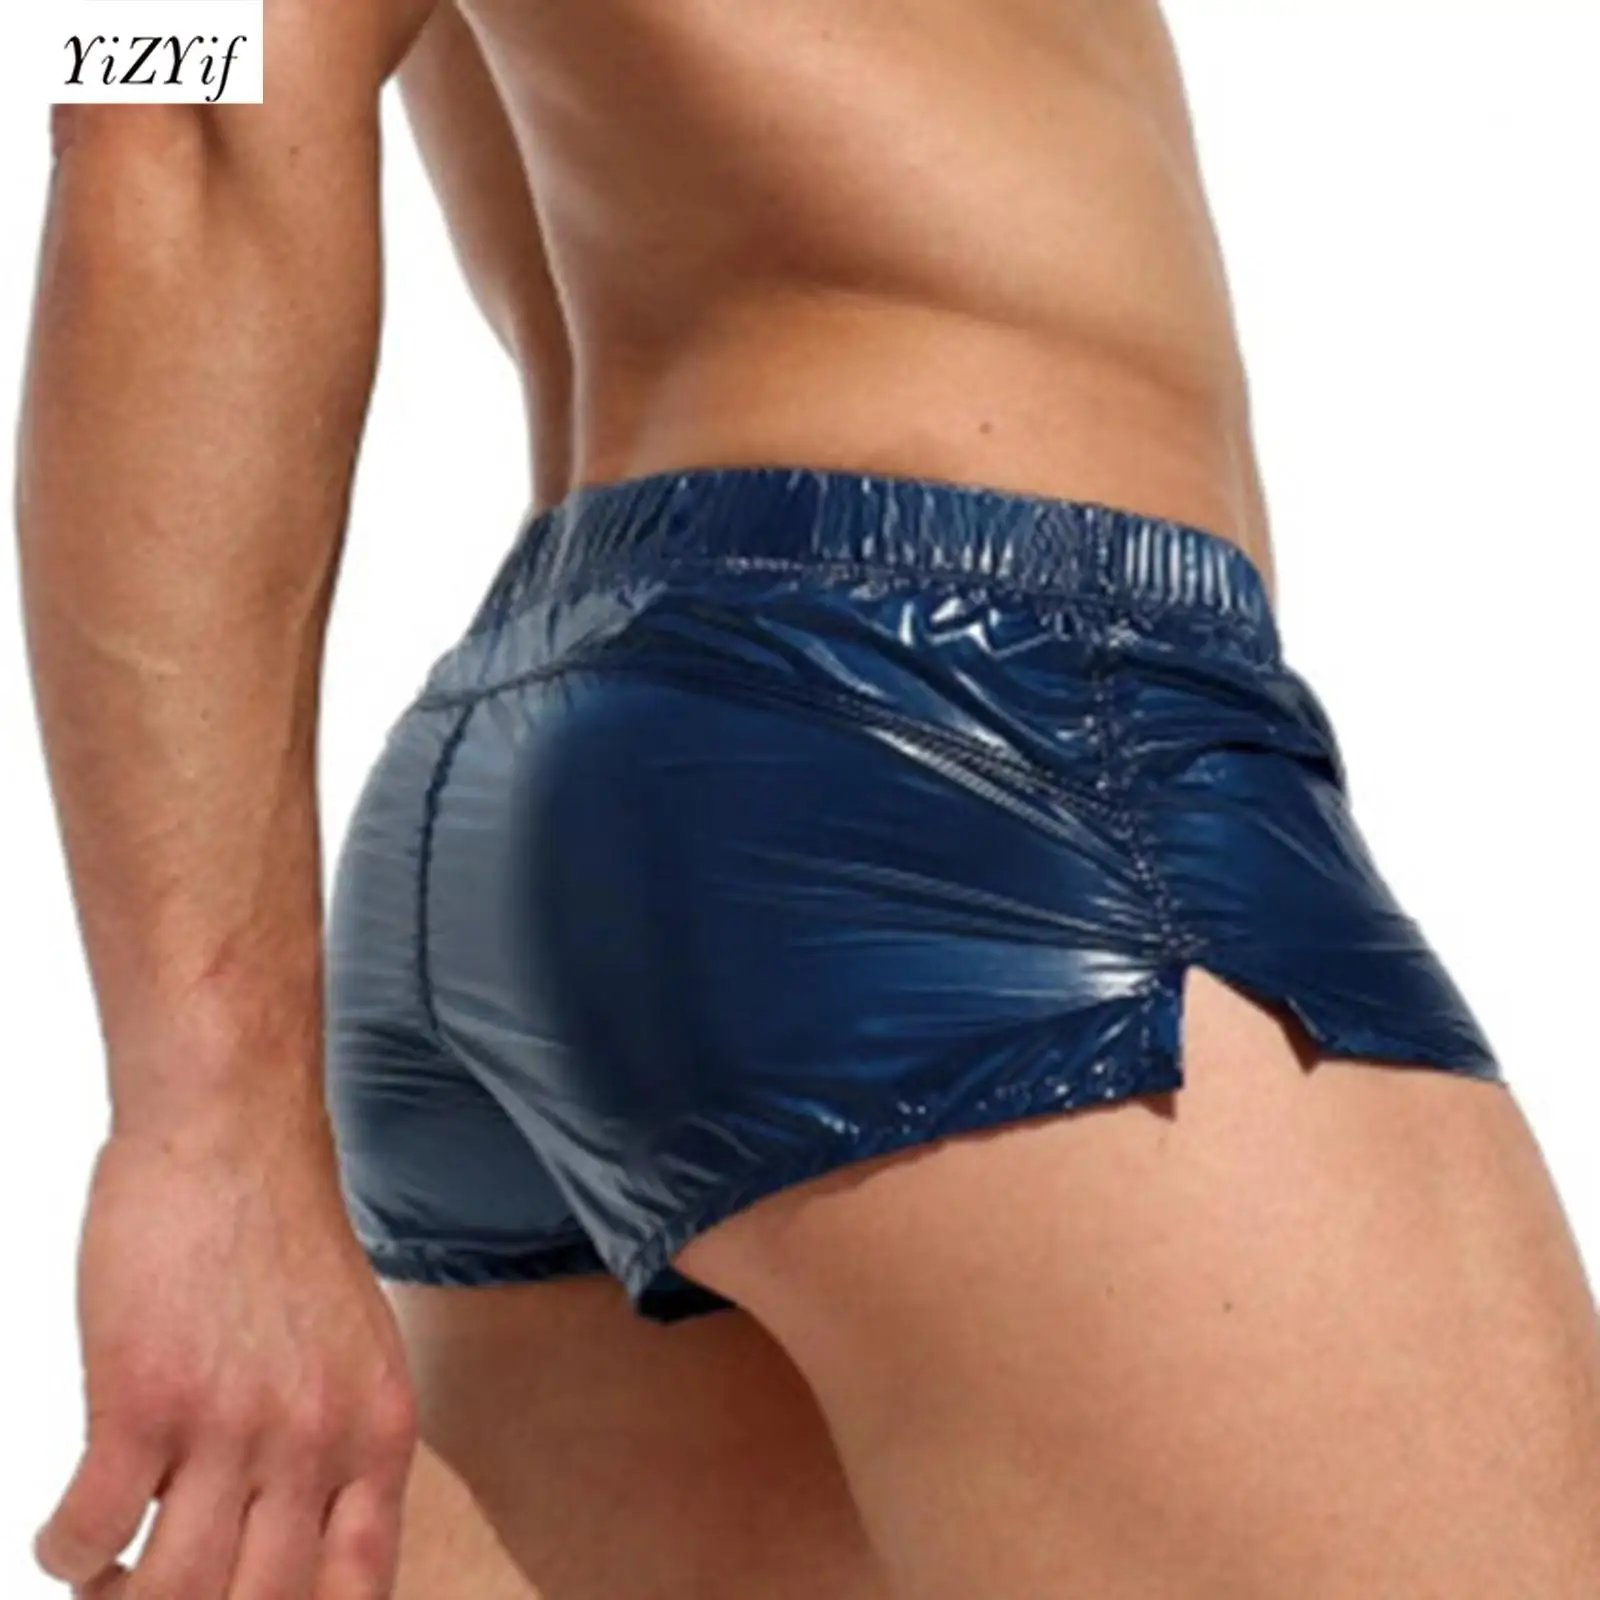 Mens Glossy Shorts Solid Color Low Rise Sides Slit Slim Fit Trunks Underpants Beach Pool Night Club Party Shorts Boxer Clubwear